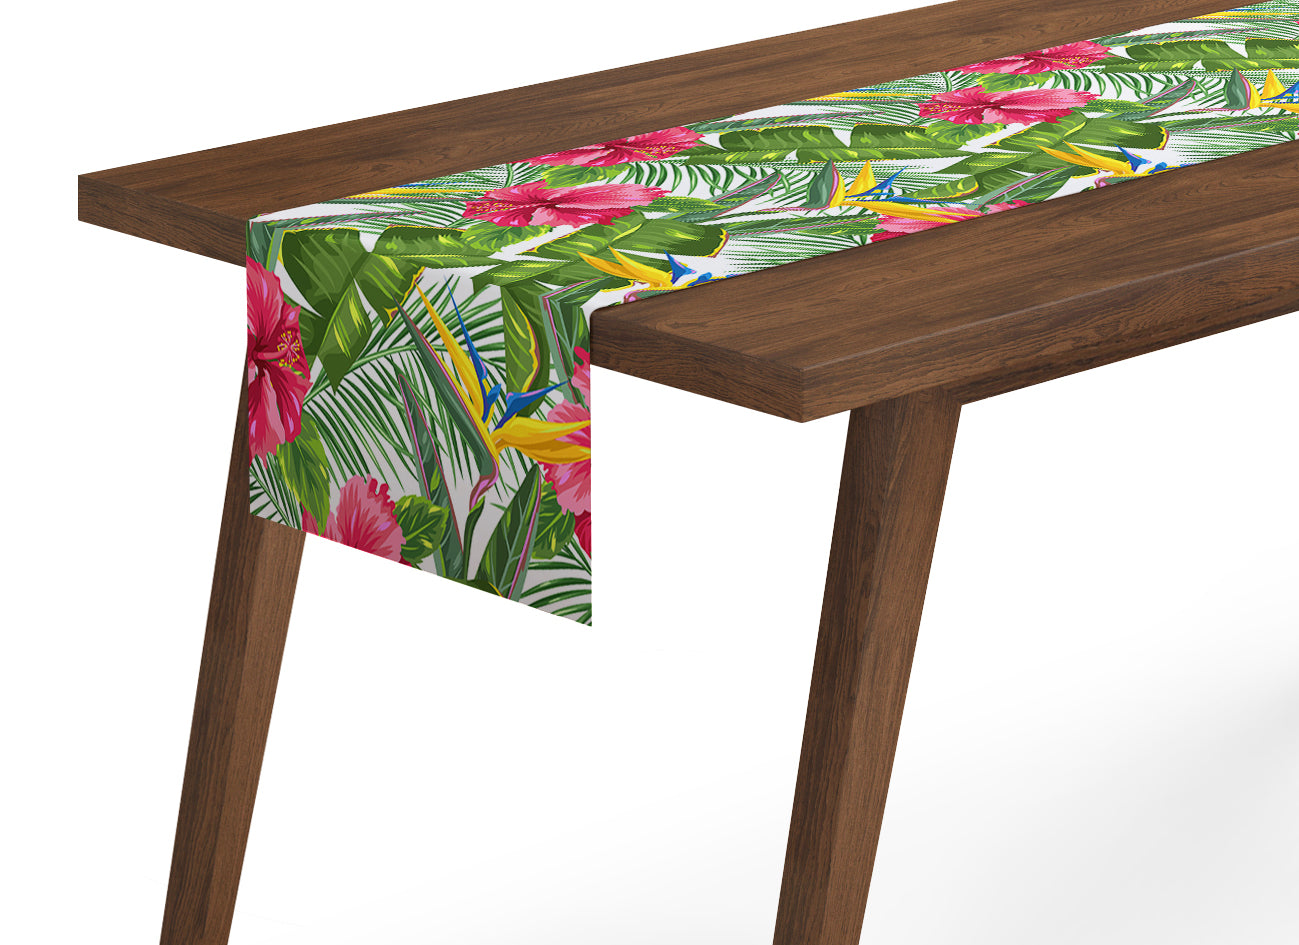 Table Runner Tropical Leaves and Strelitzia - Wellmira